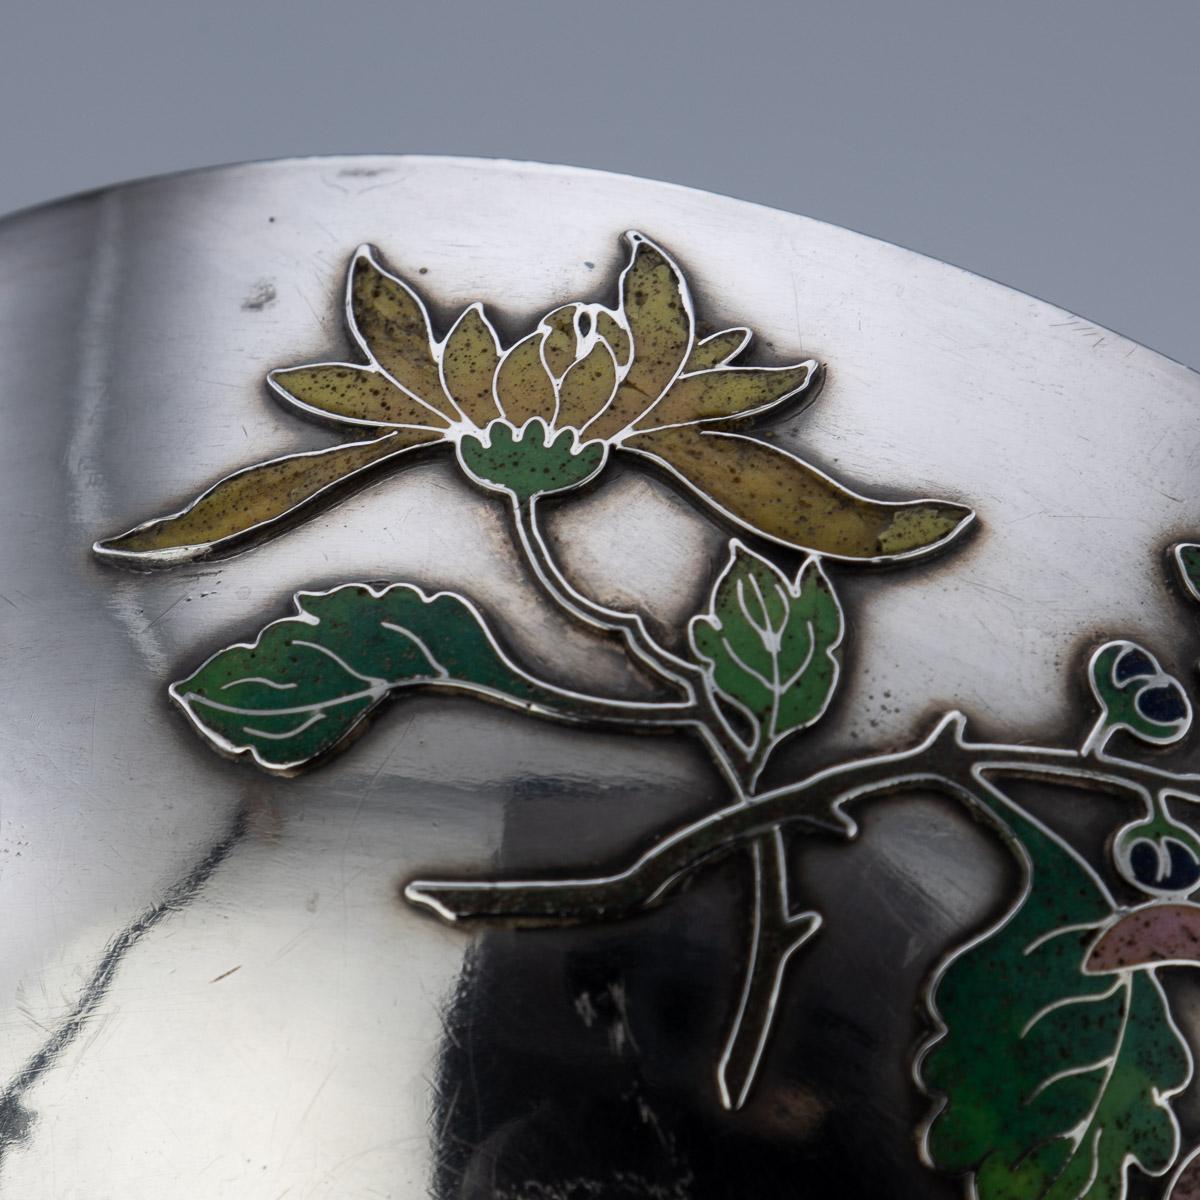 19th Century Rare Chinese Export Solid Silver & Enamel Bowl, Wang Hing, c.1890 For Sale 10